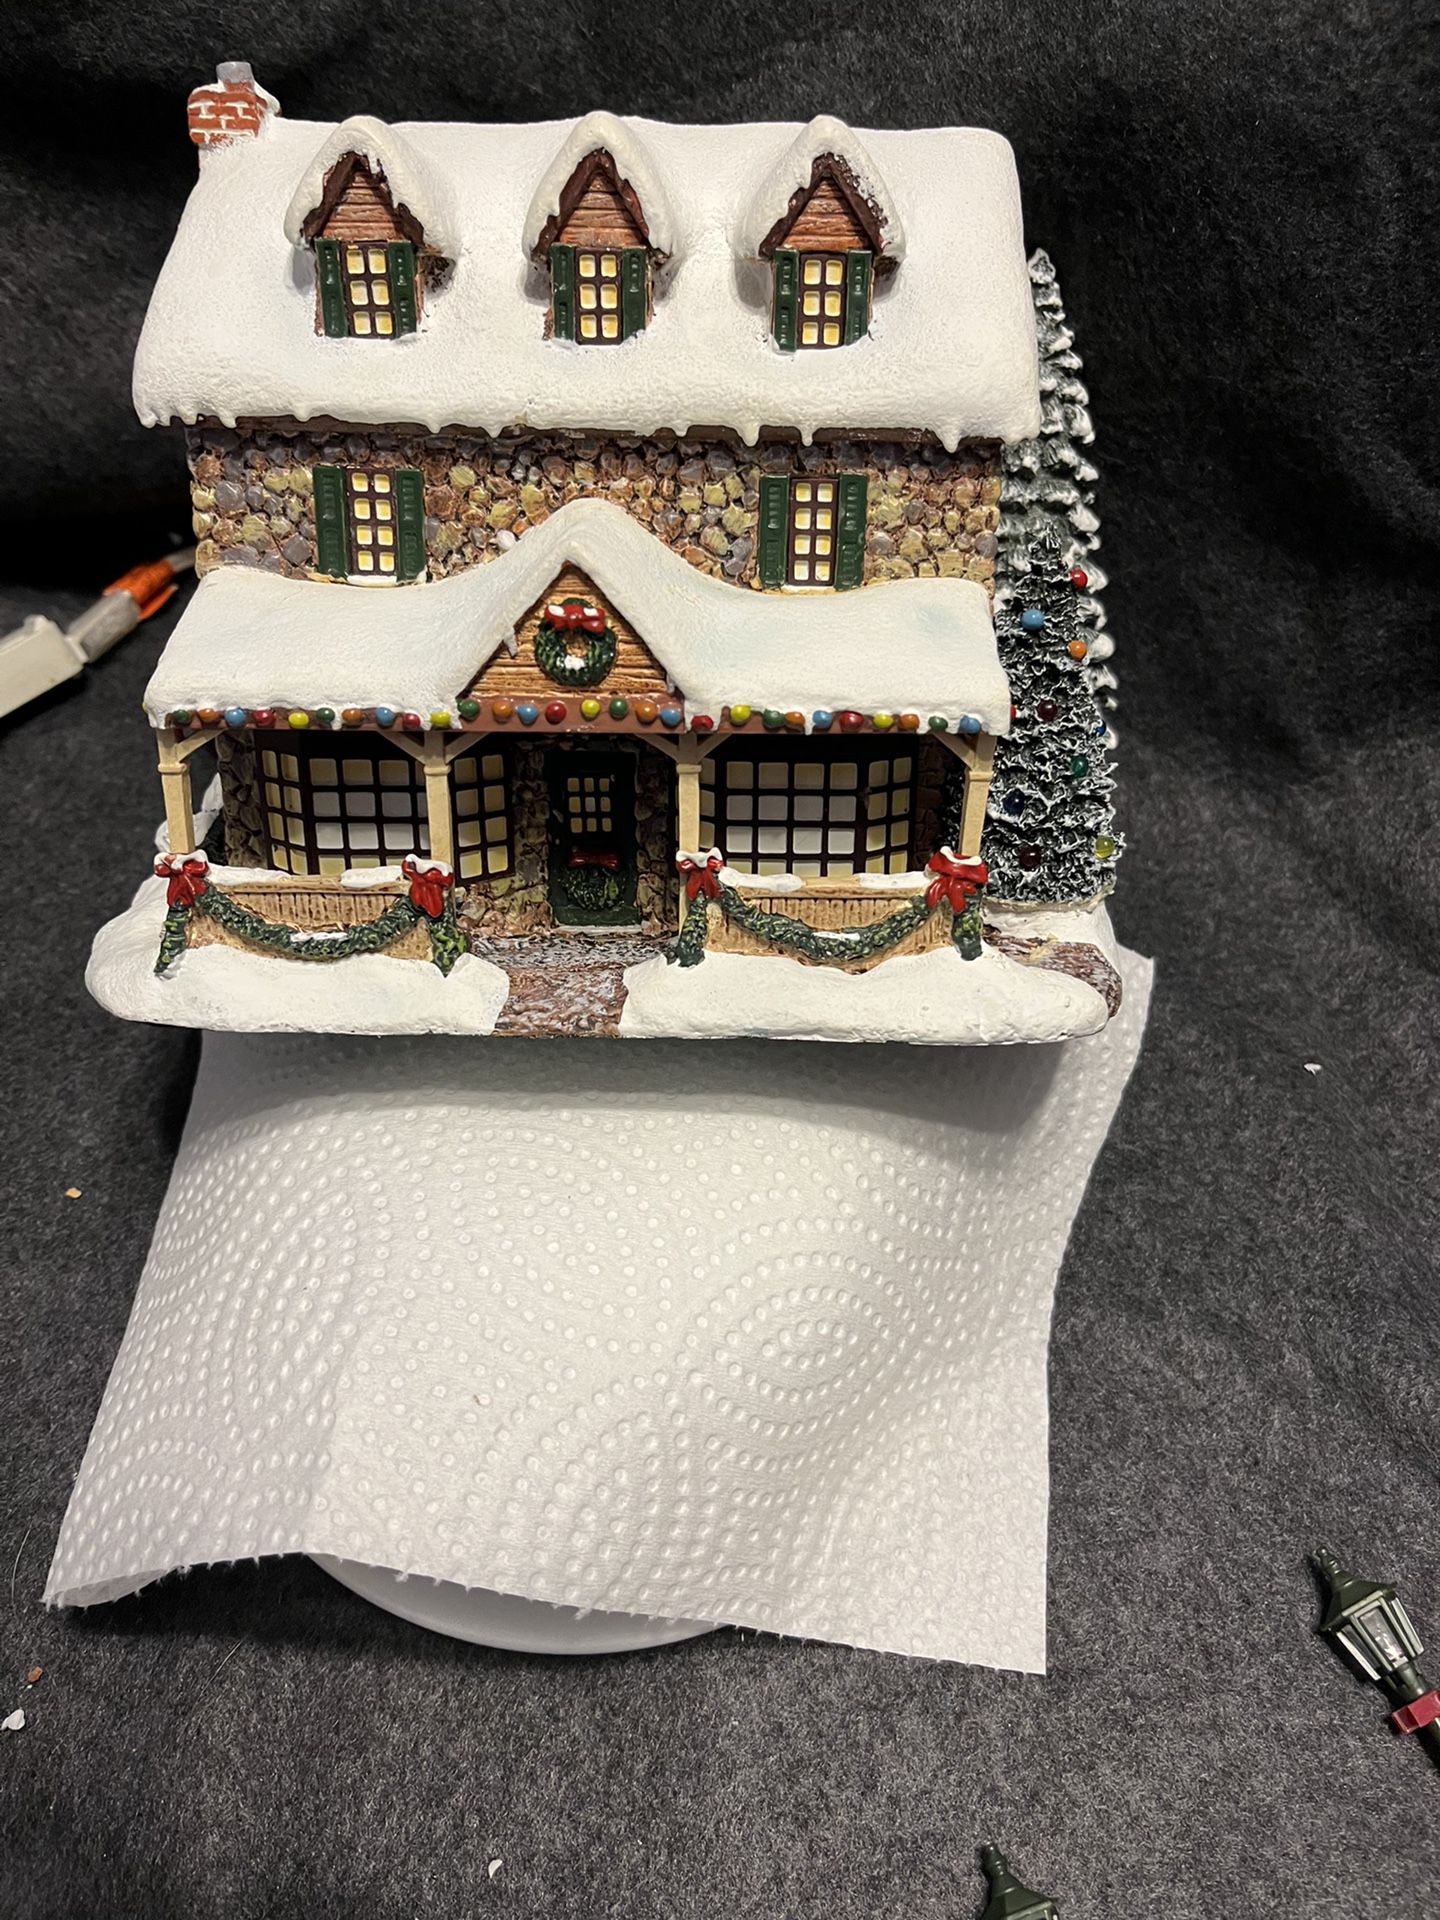 7  “Thomas Kinkade ‘s “ Village Christmas Collection , Each Come with cord that allows them to light up with switch